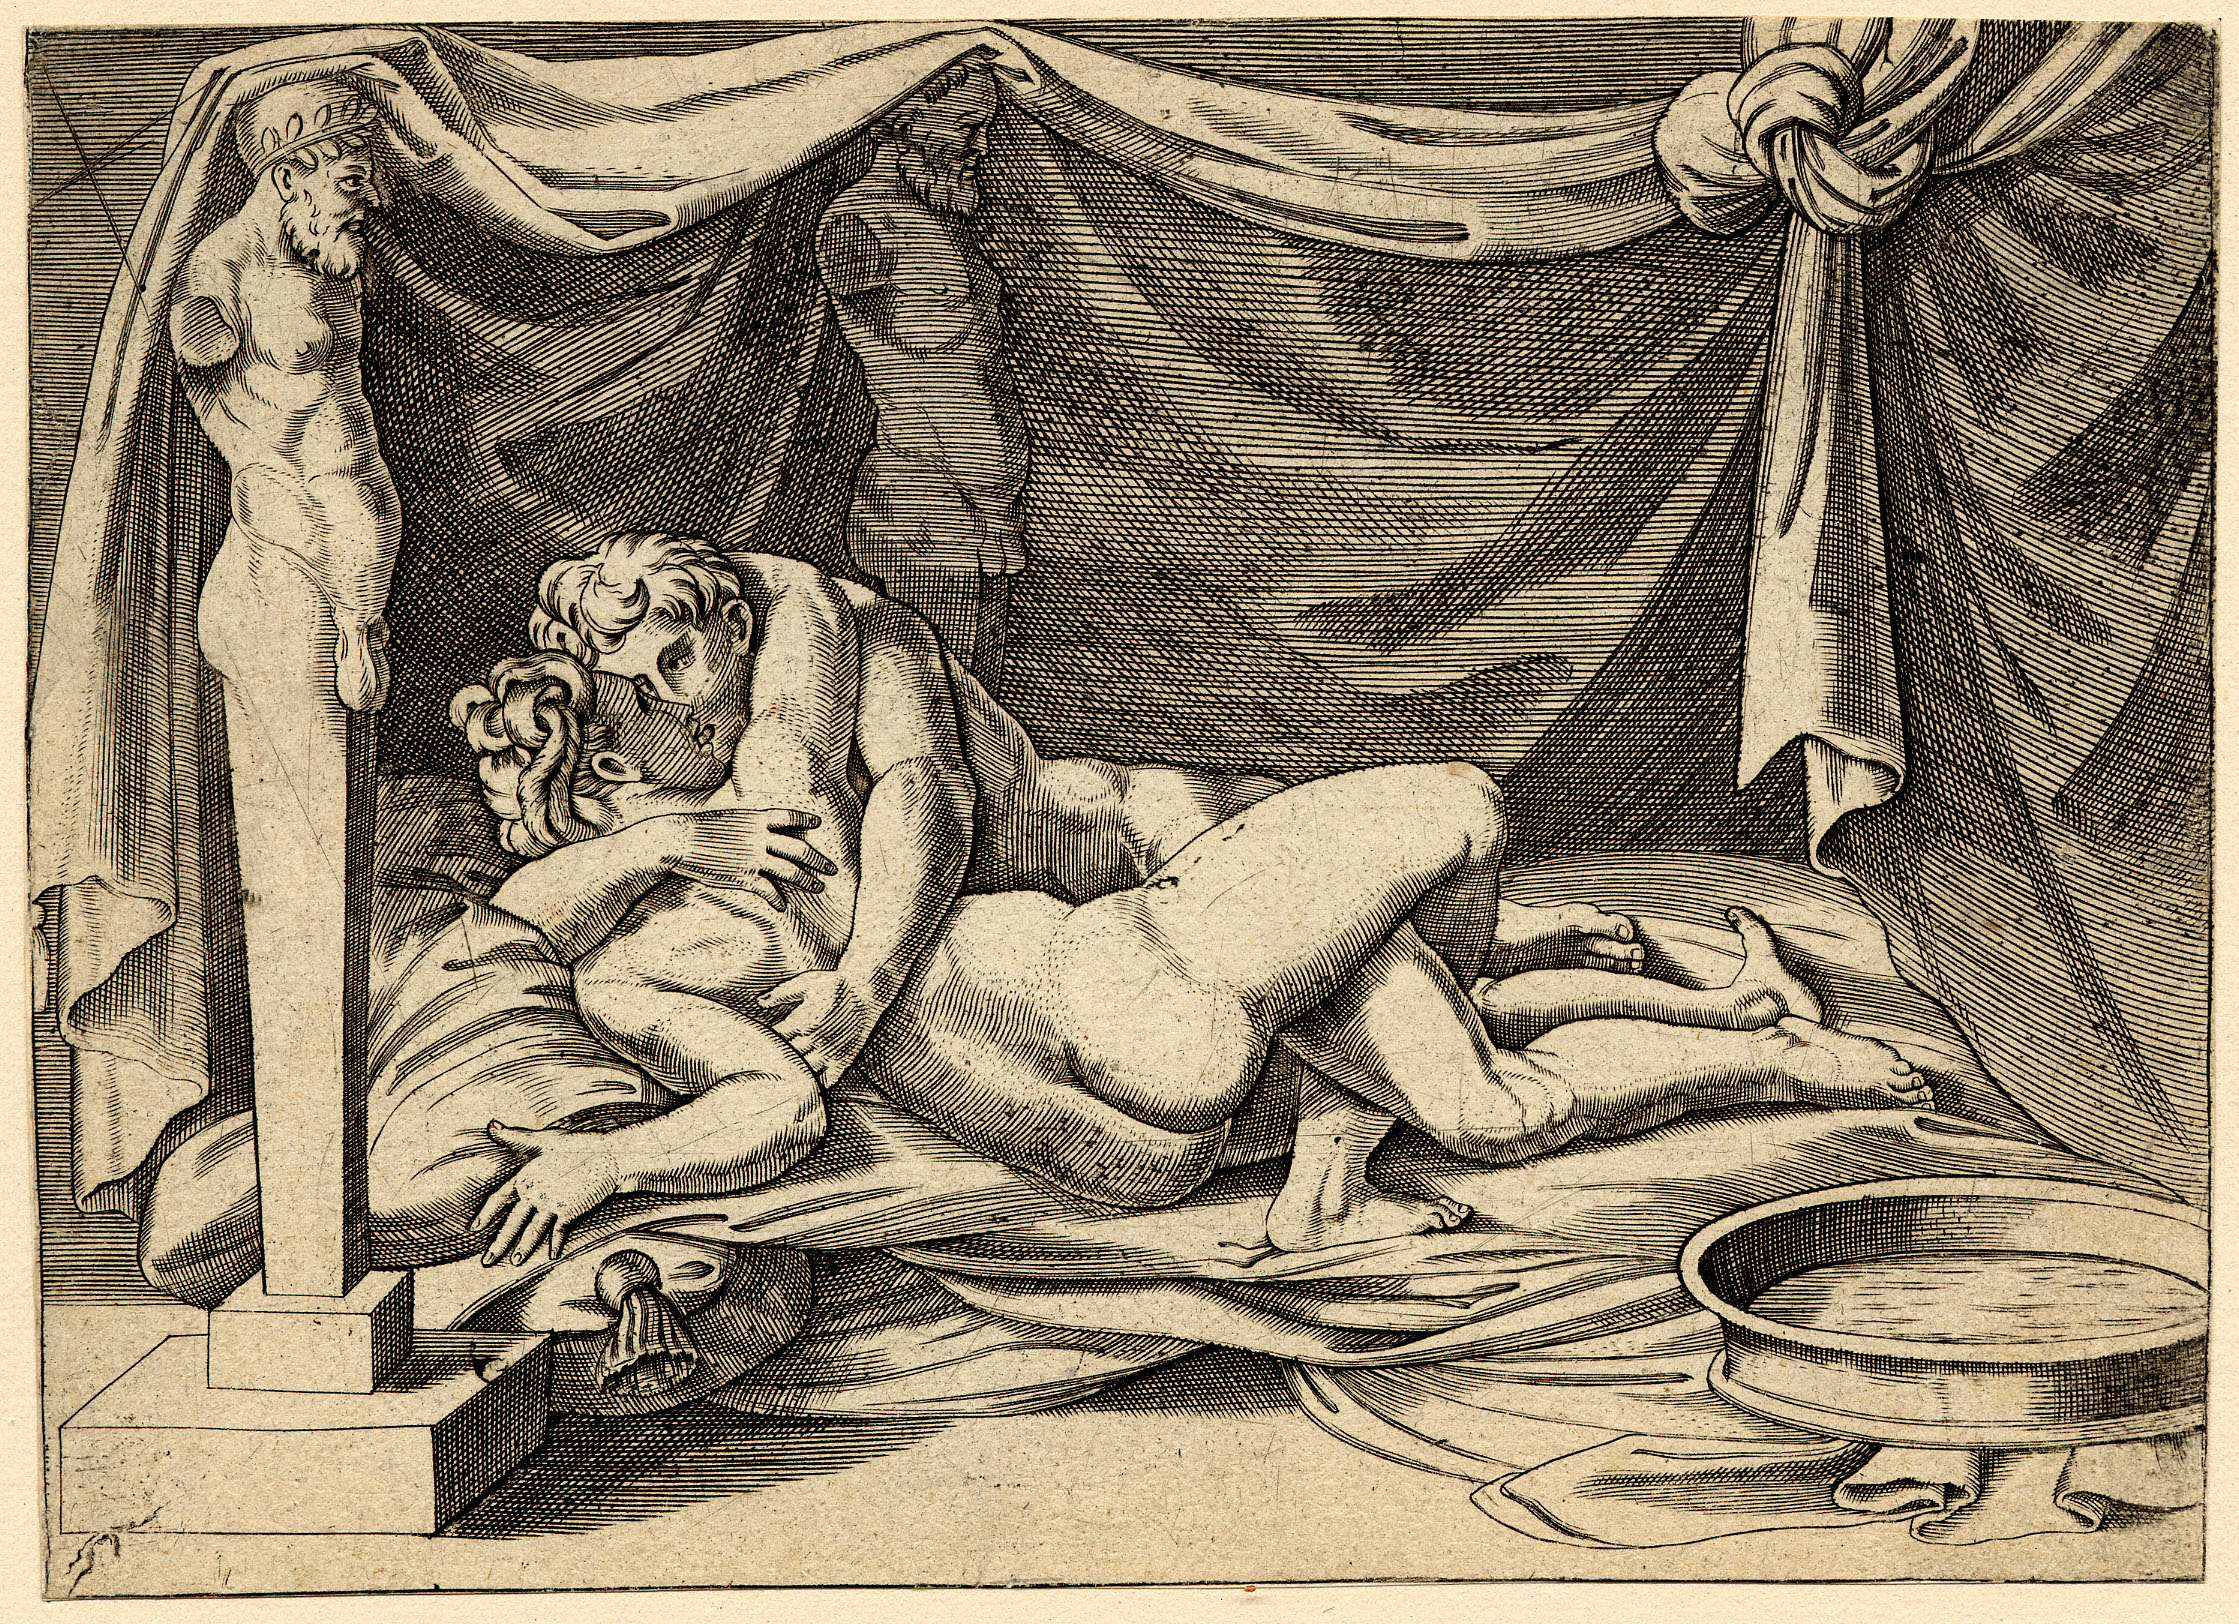 https://upload.wikimedia.org/wikipedia/commons/a/ac/Marcantonio_-_A_nude_God_and_Goddess_laying_on_a_bed_embracing%2C_1857%2C0711.20.jpg